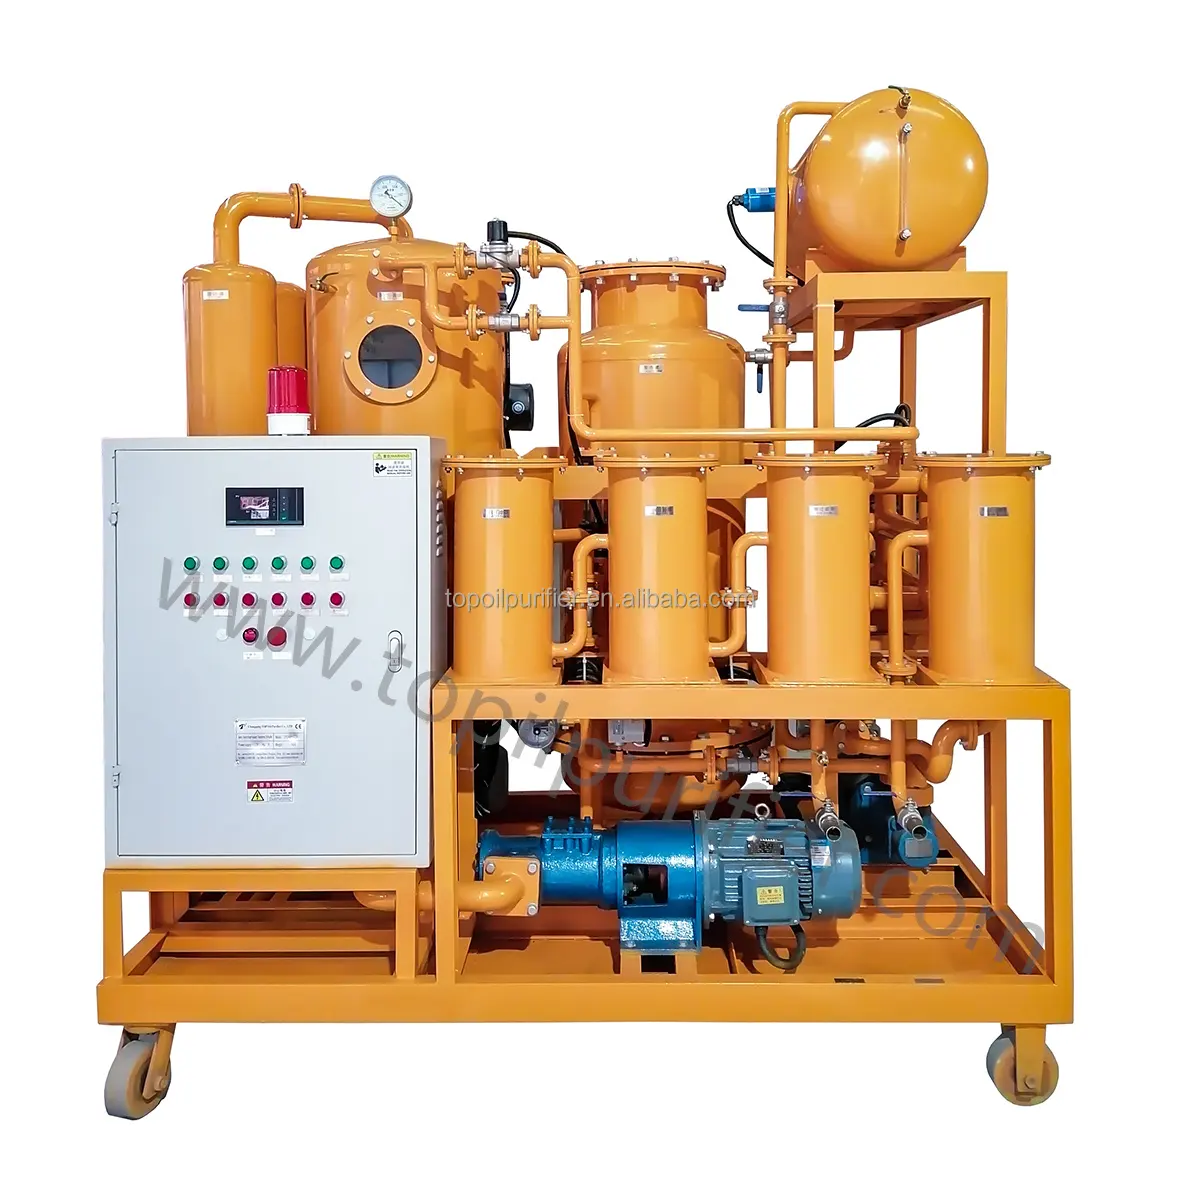 Insulating Oil Regeneration System Double Stage Vacuum Used Transformer Oil Filtration